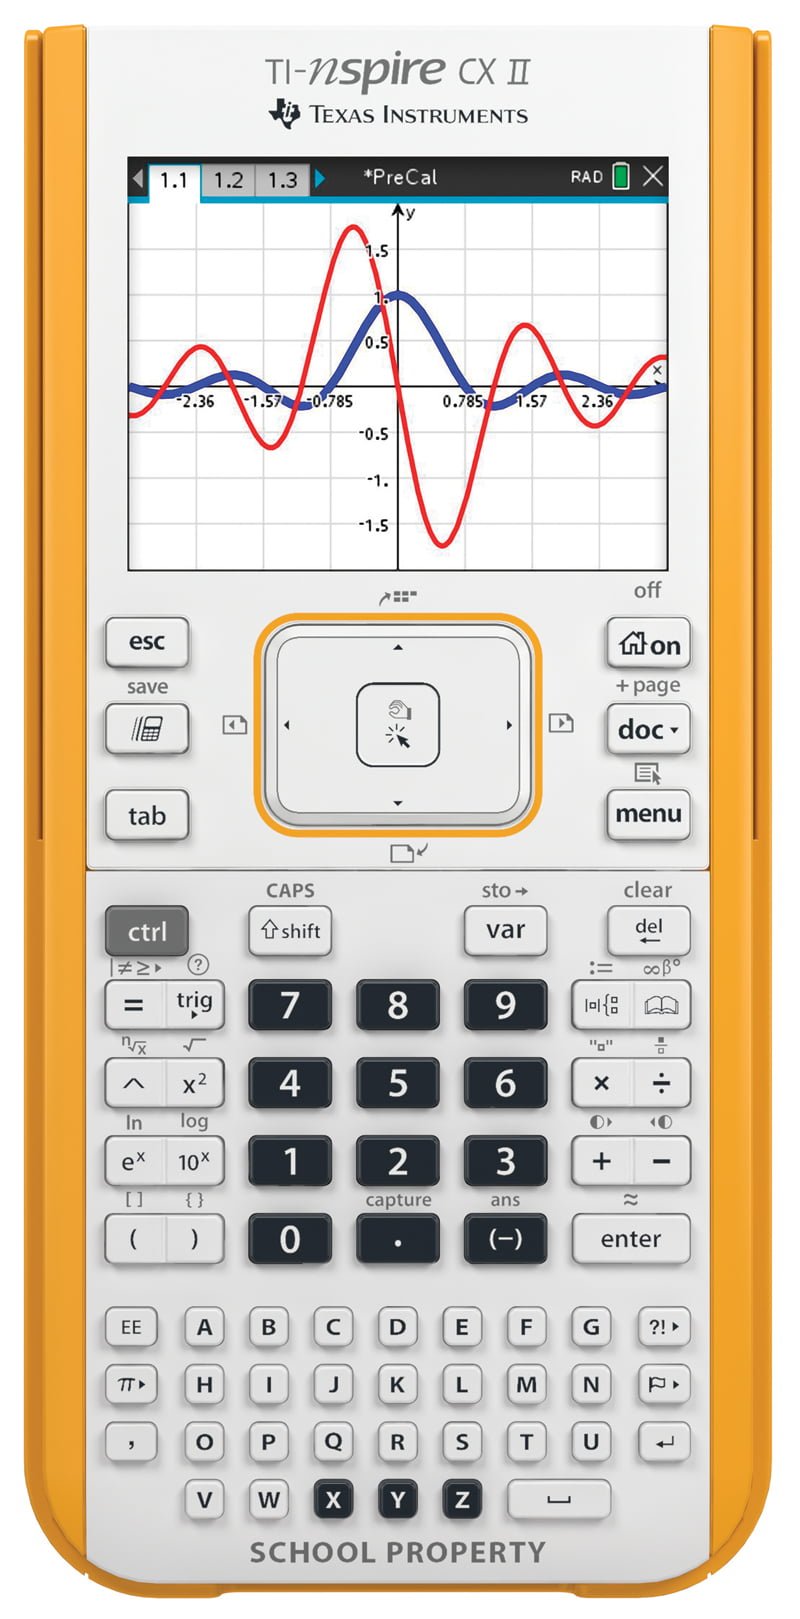 Texas Instruments Nspire CX Graphic Calculator for Maths and Science by Texas Instruments